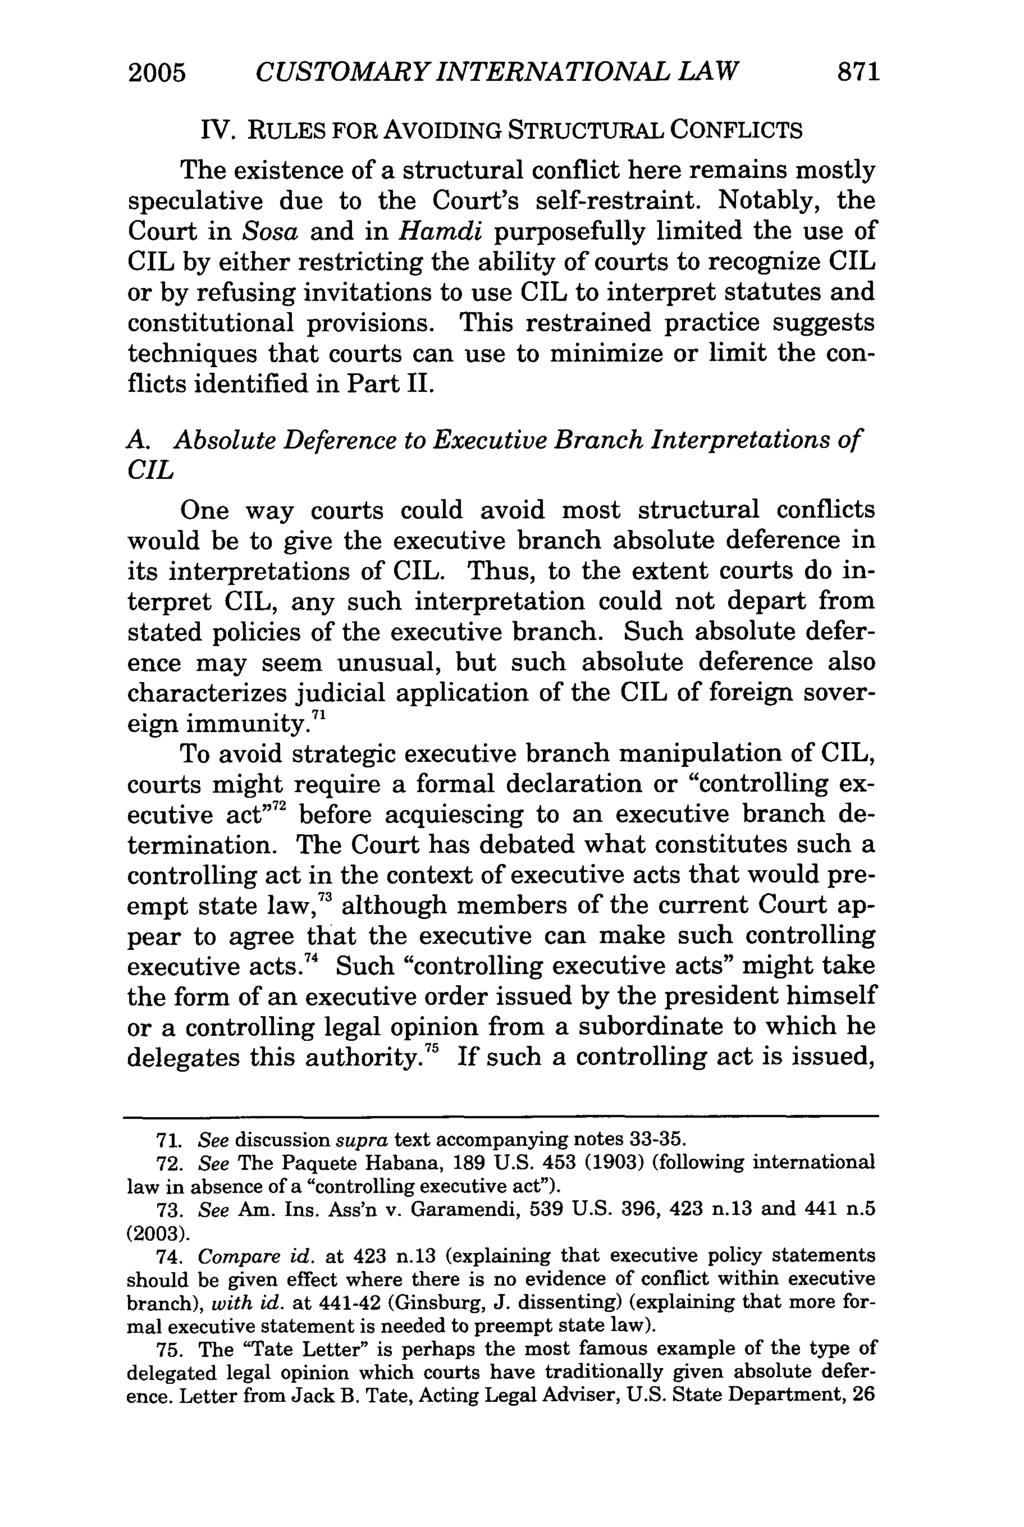 2005 CUSTOMARY INTERNATIONAL LAW IV. RULES FOR AVOIDING STRUCTURAL CONFLICTS The existence of a structural conflict here remains mostly speculative due to the Court's self-restraint.